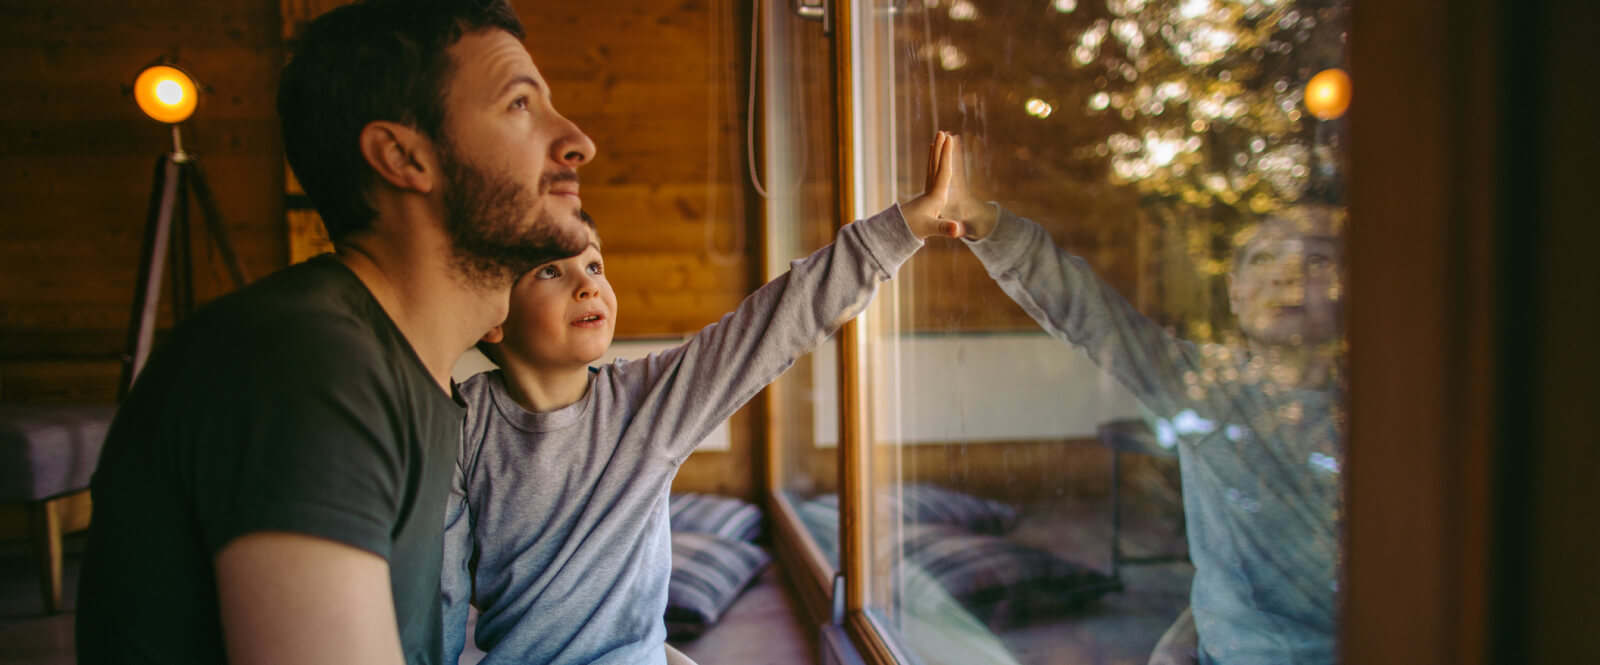 Man holding a young boy looking out a large window